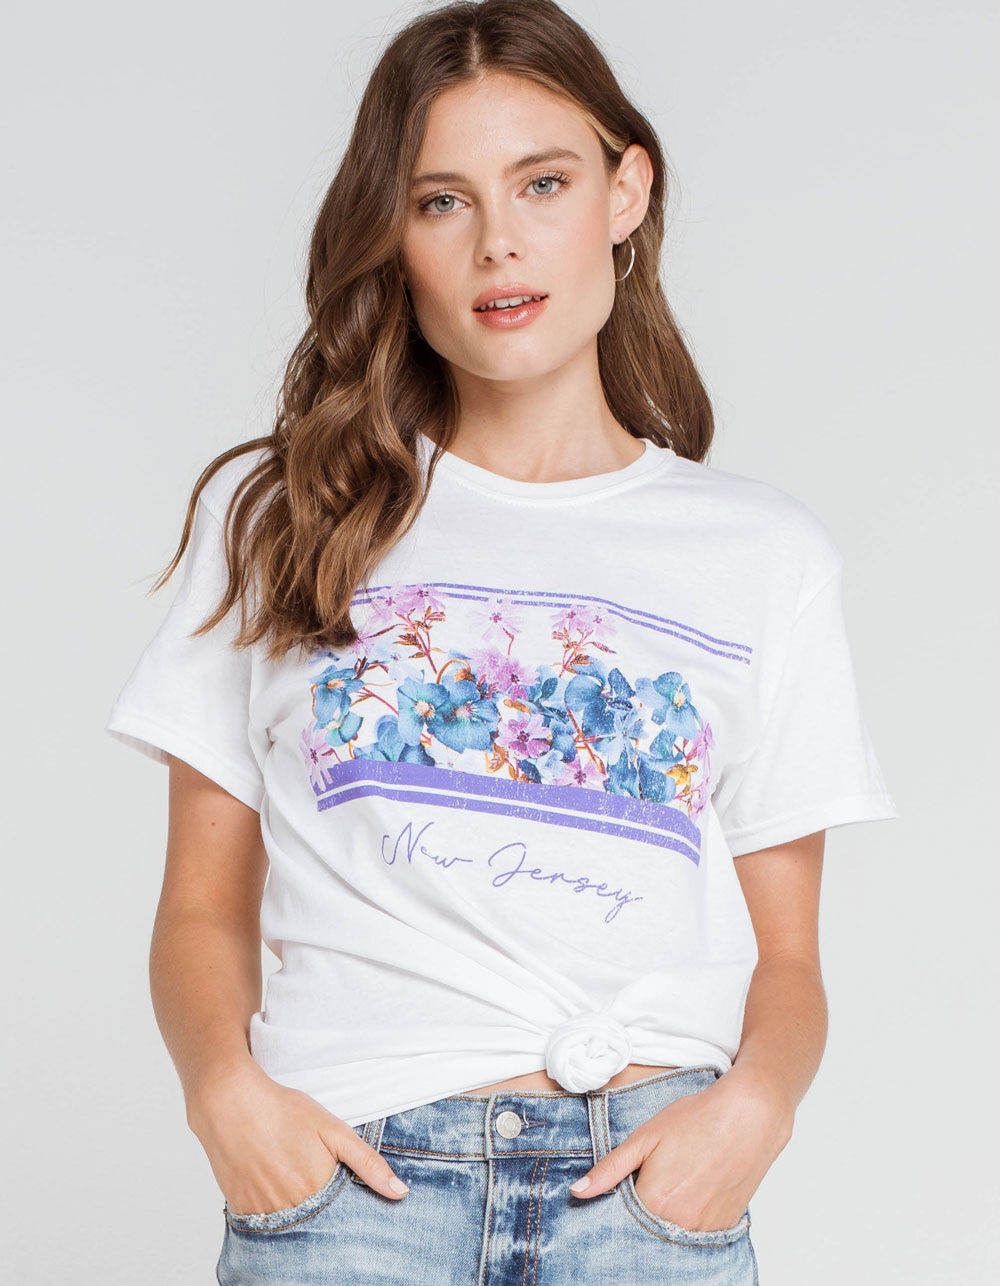 WEST OF MELROSE New Jersey Violets Womens Tee - WHITE | Tillys